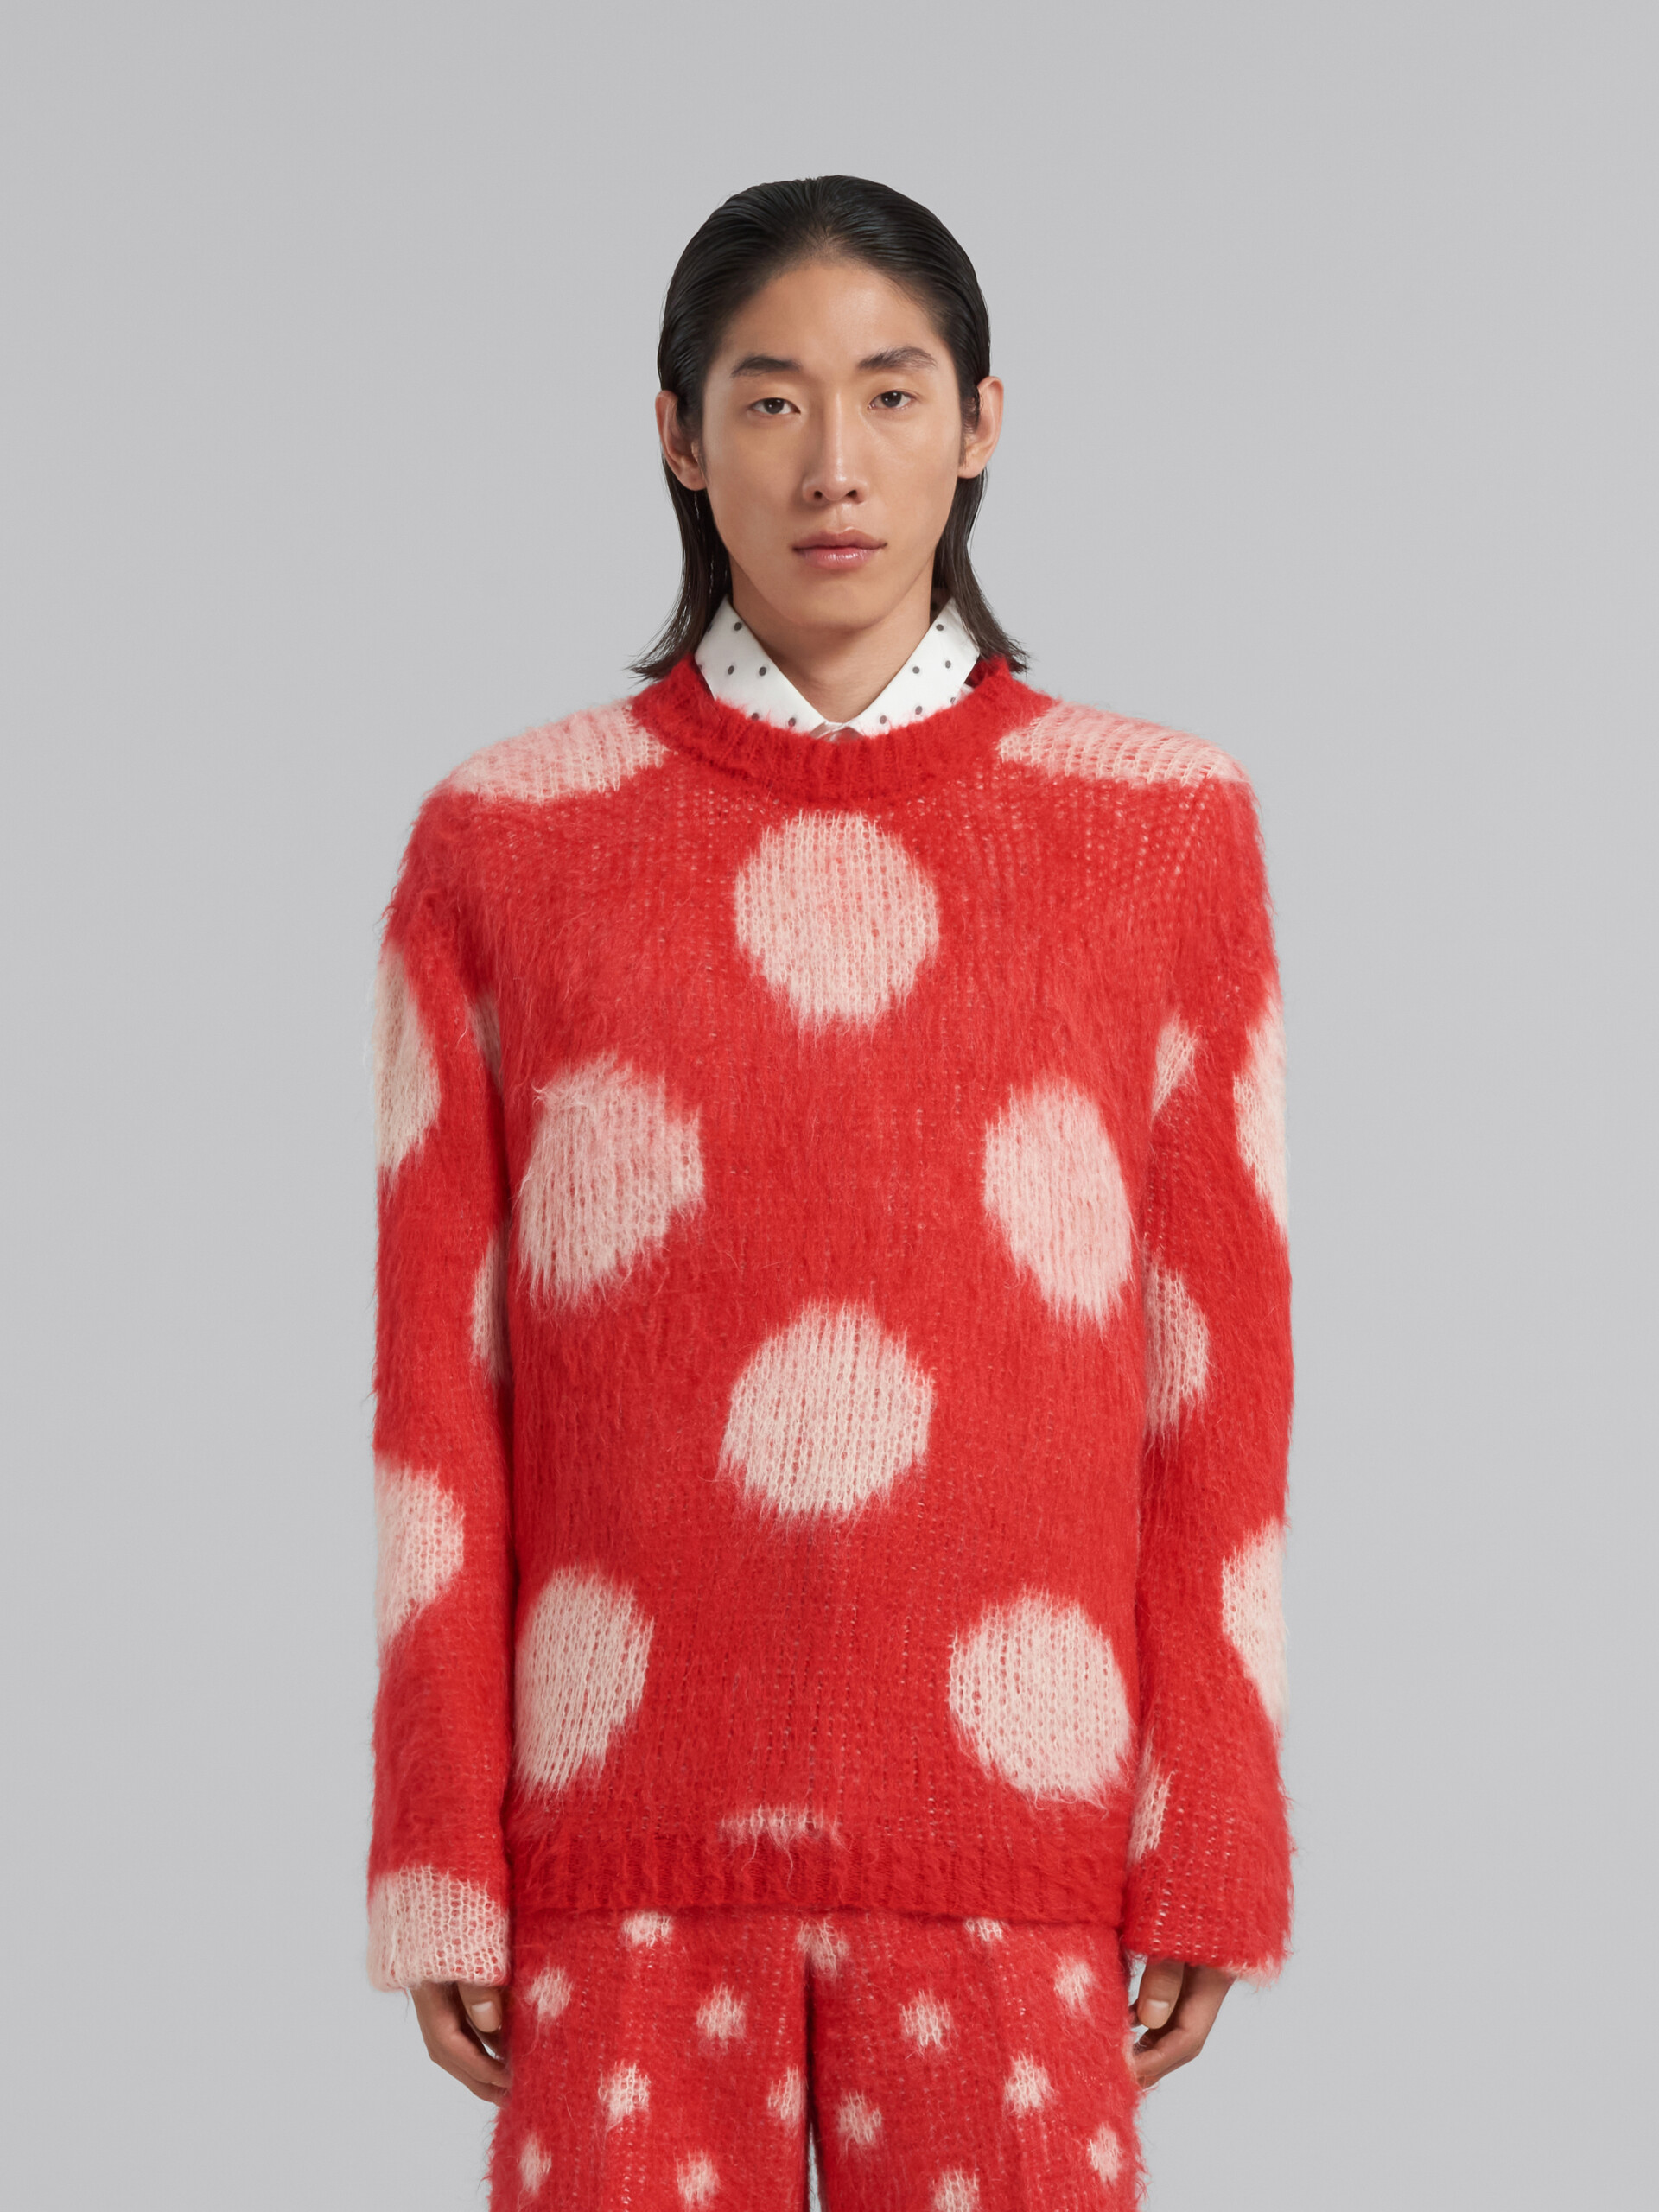 Red mohair jumper with maxi polka dots - Pullovers - Image 2